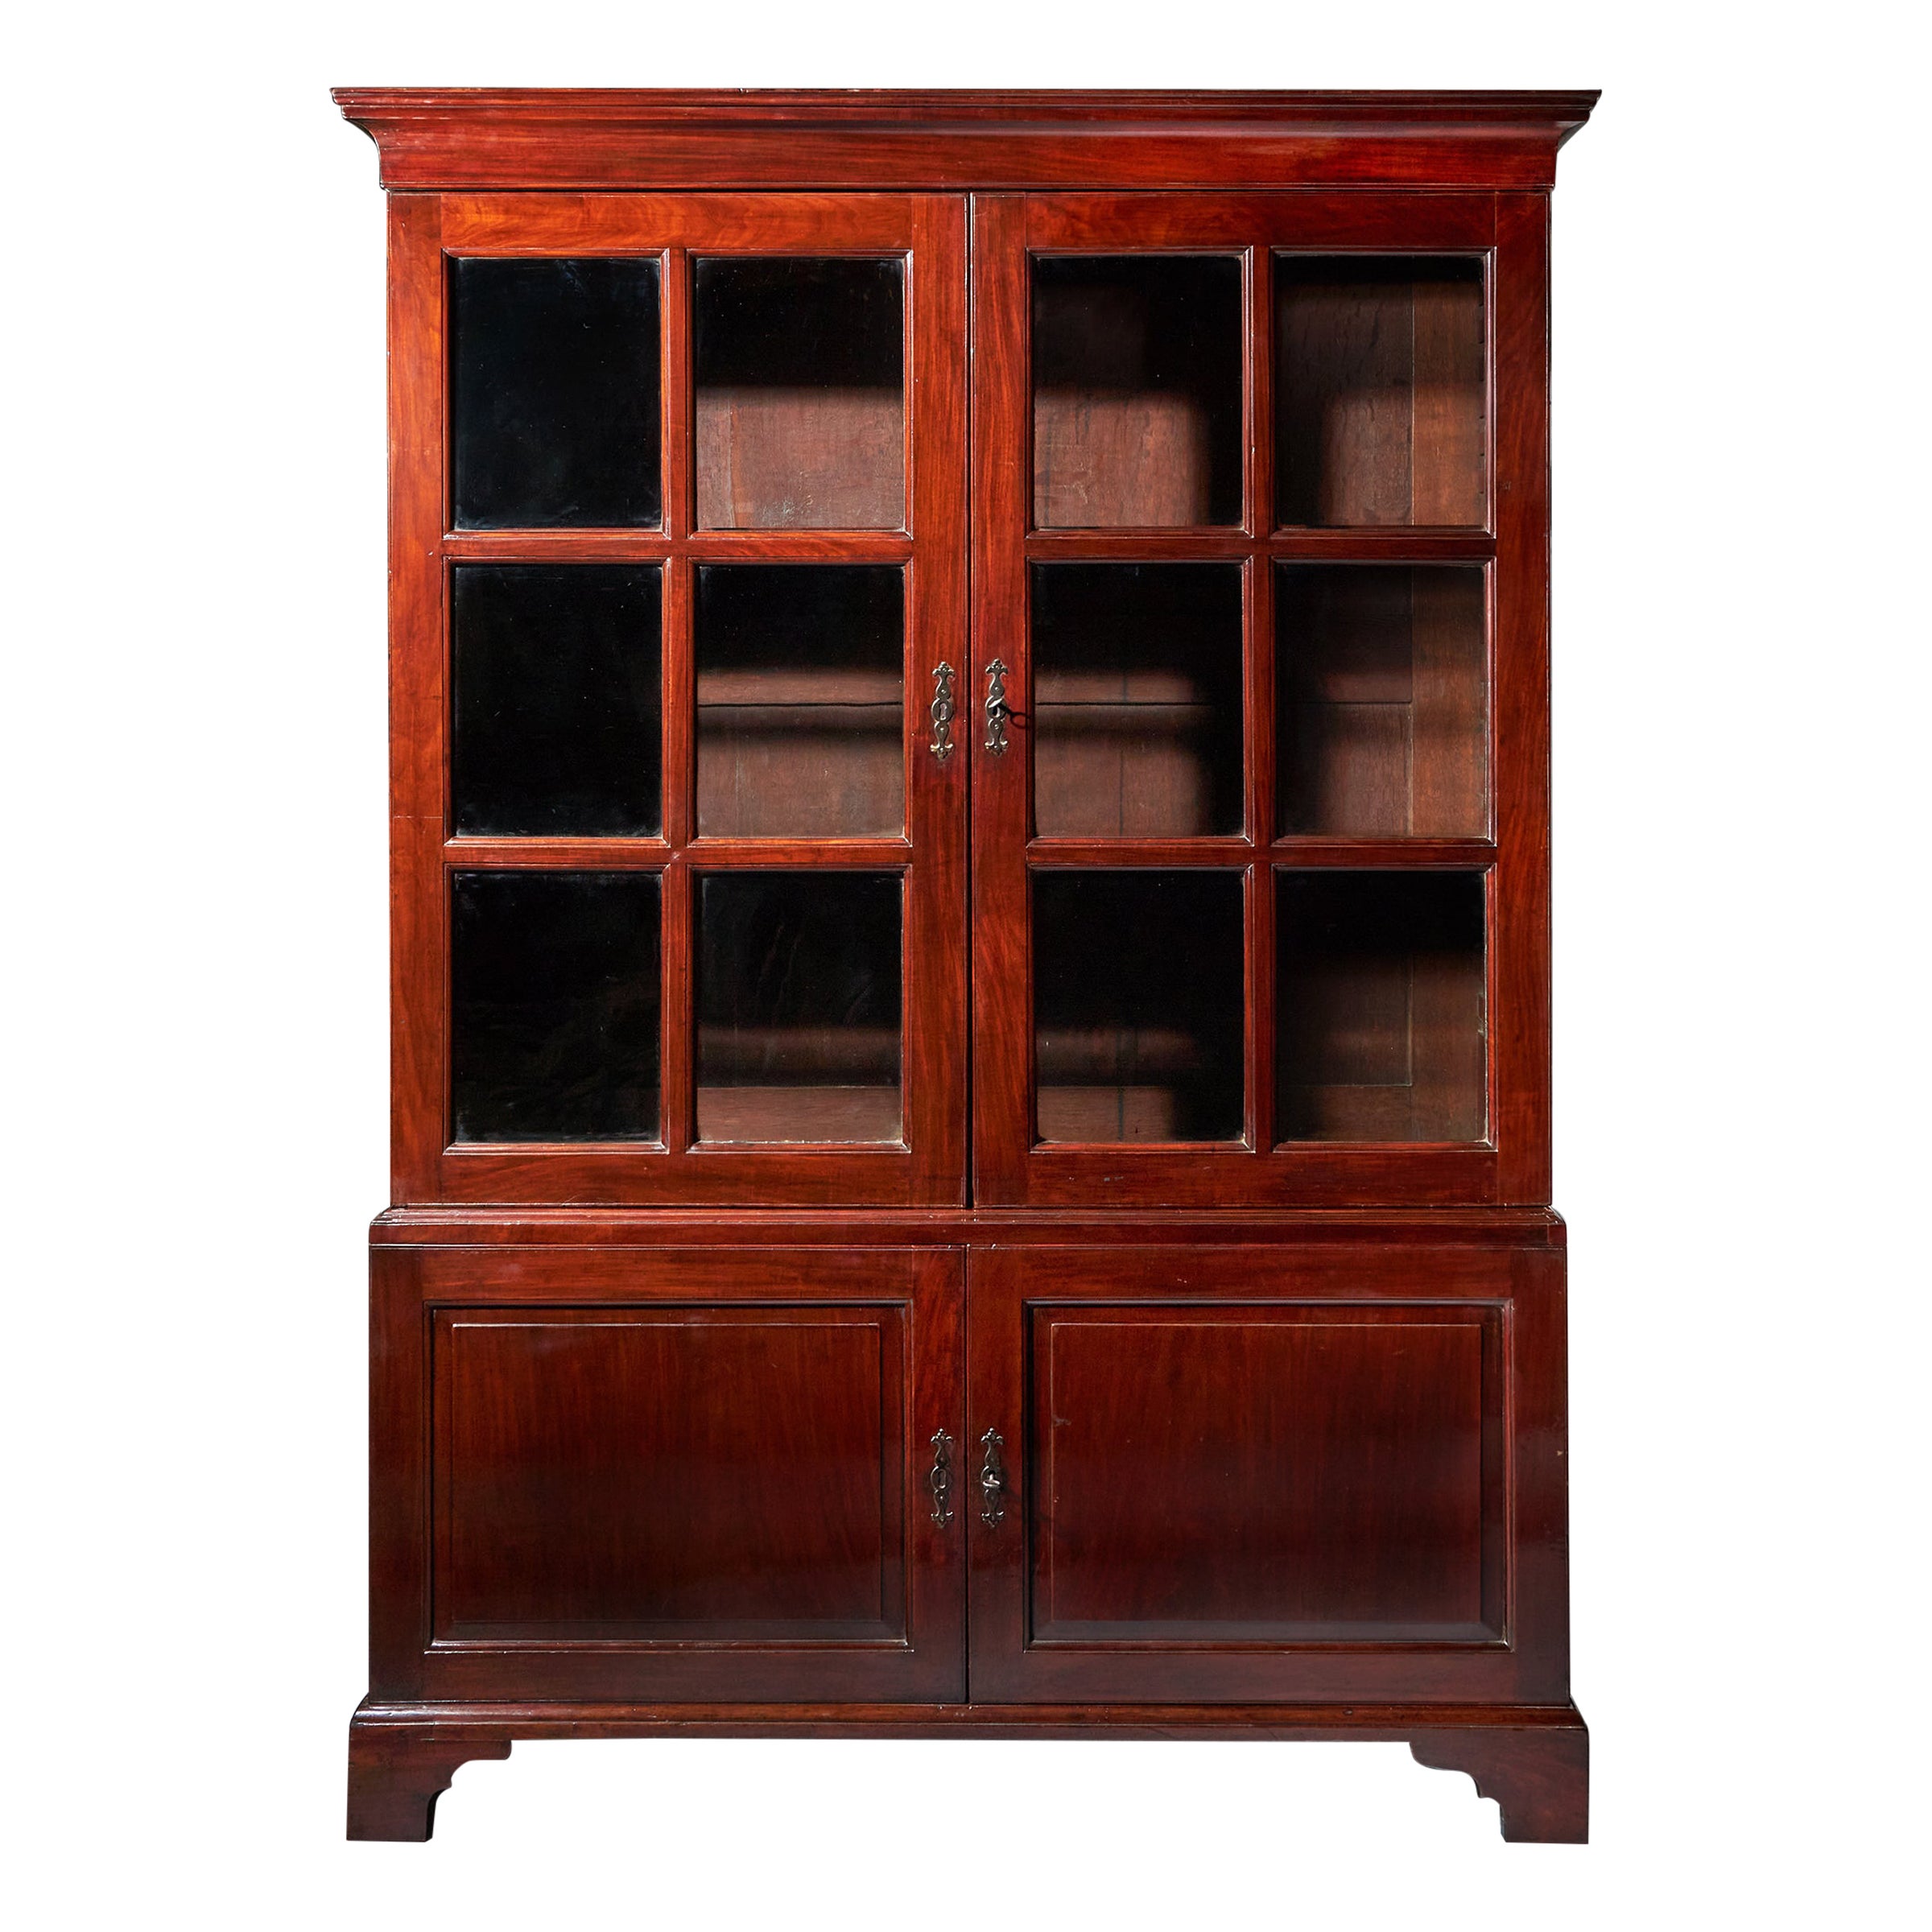 18th Century George II Chippendale Period Two-Door Mahogany Glazed Bookcase